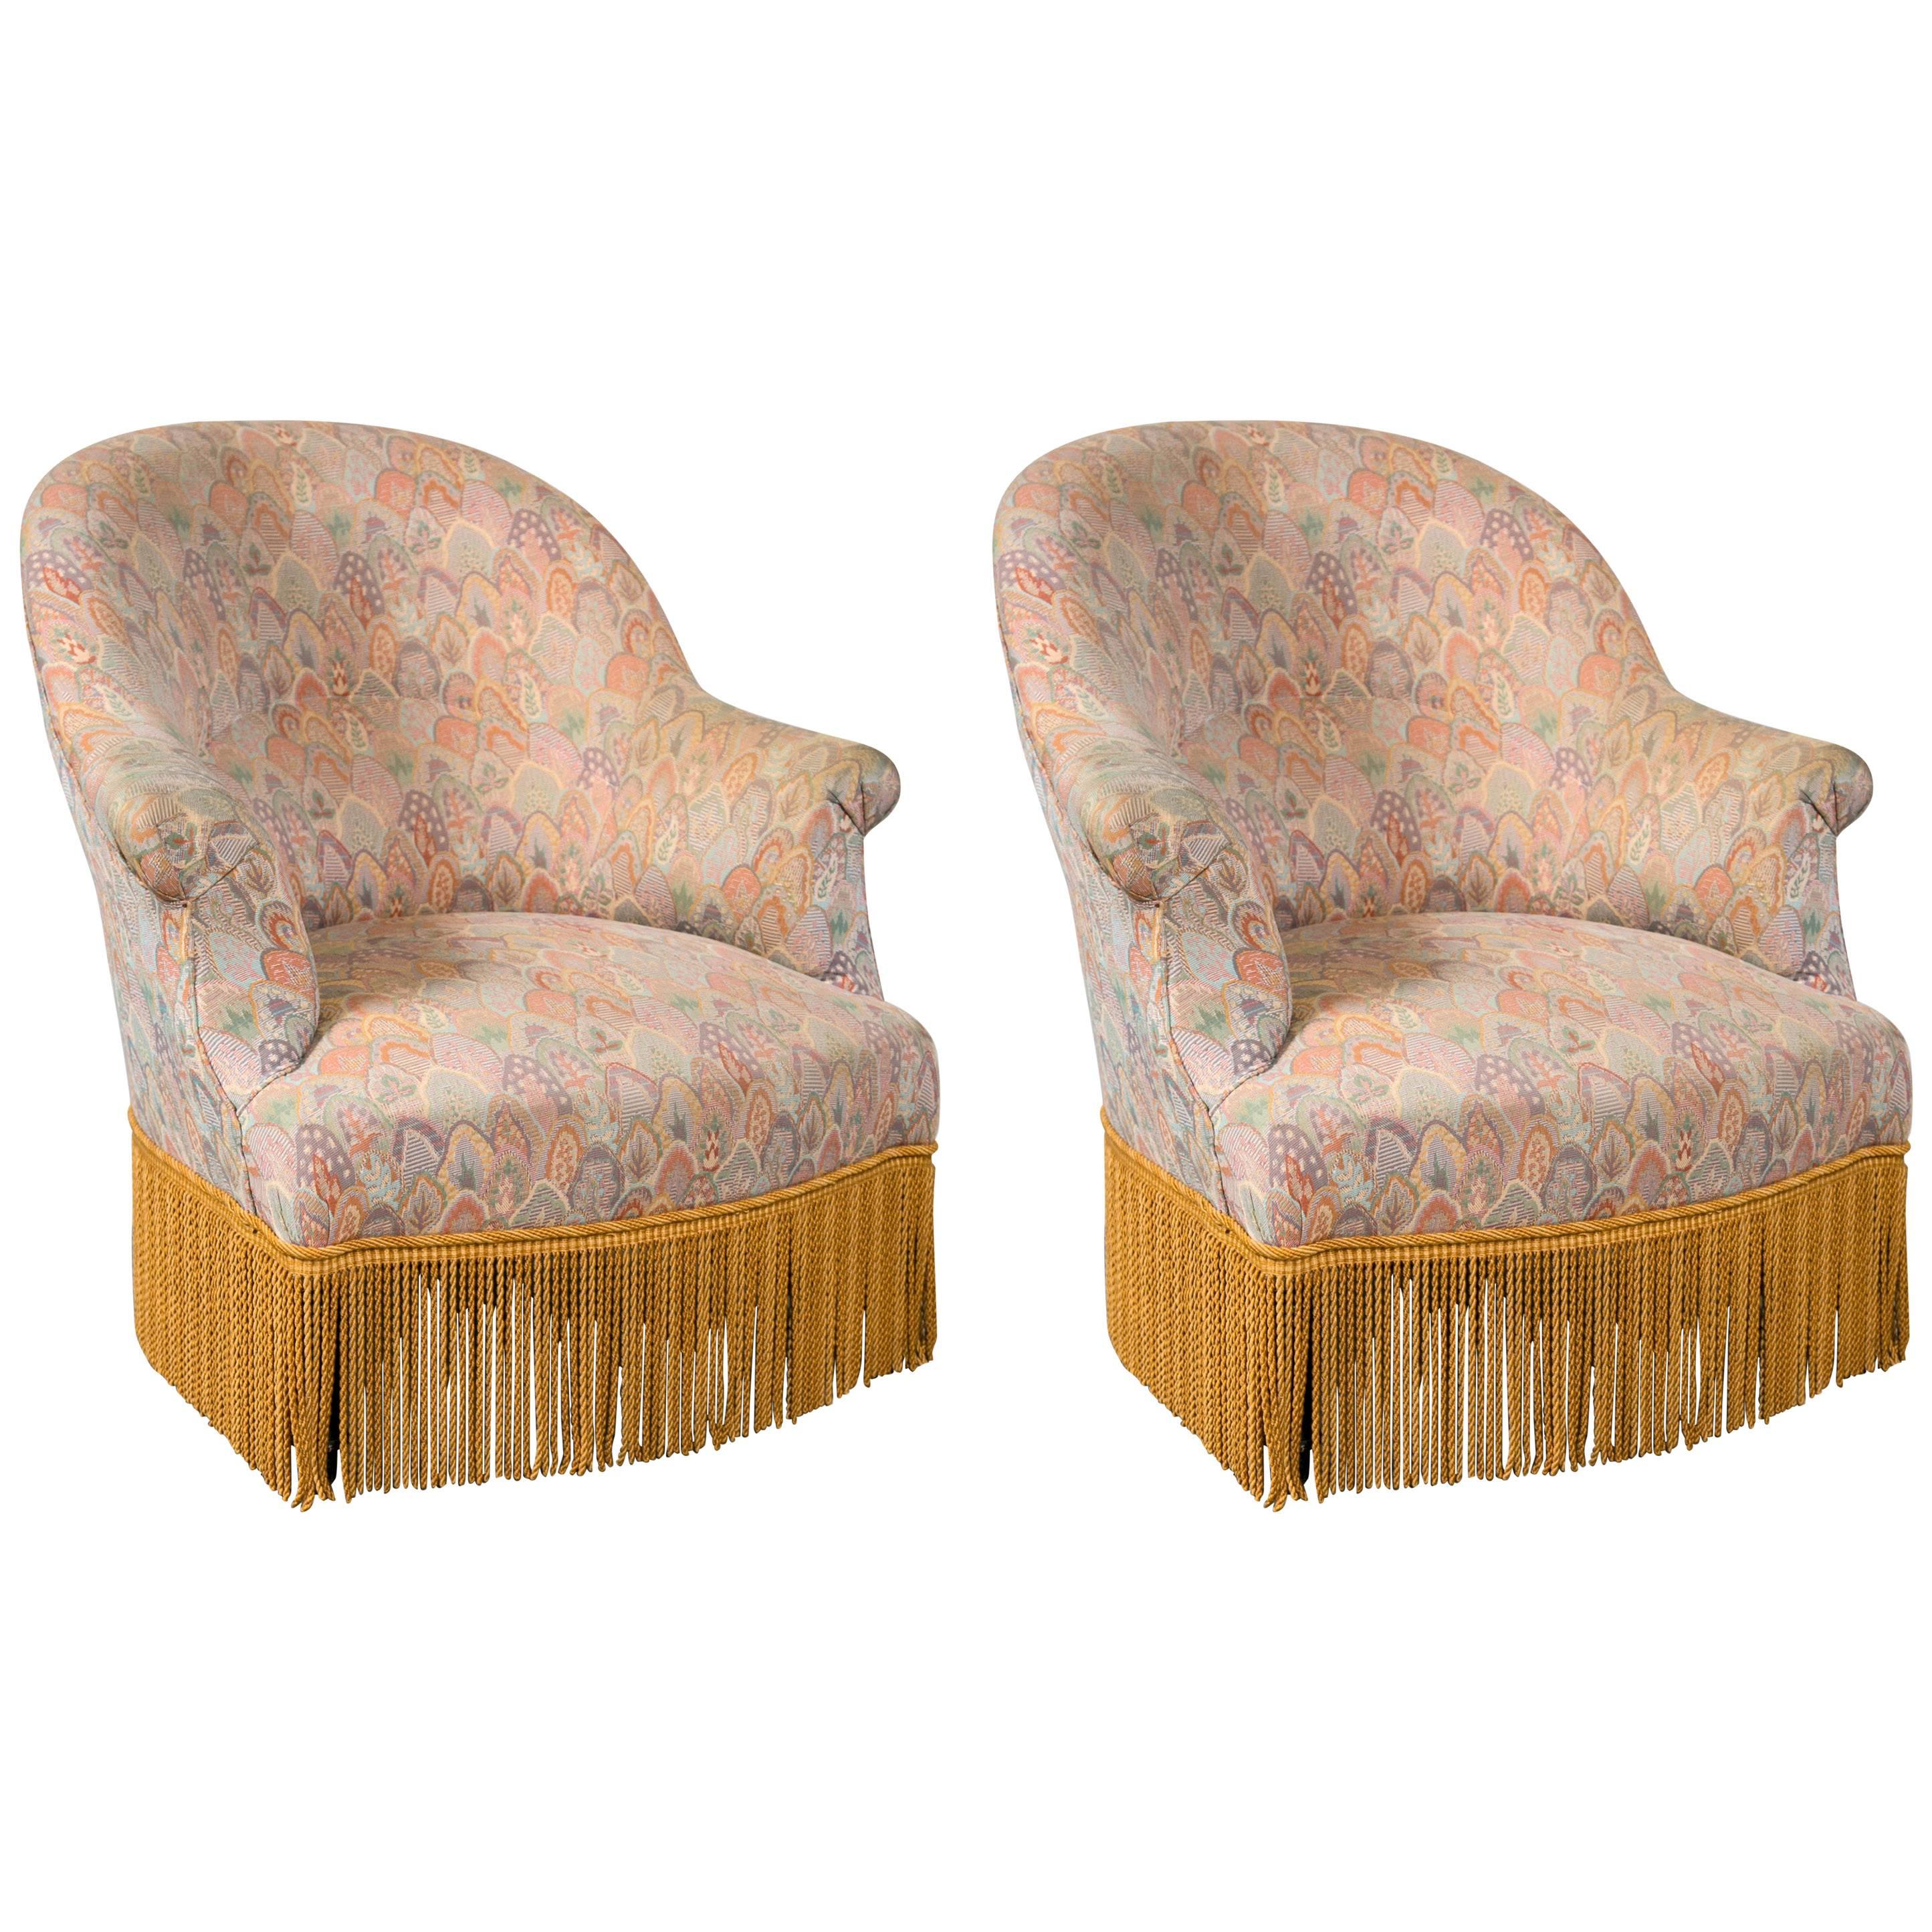 Pair of English Slipper Chairs For Sale